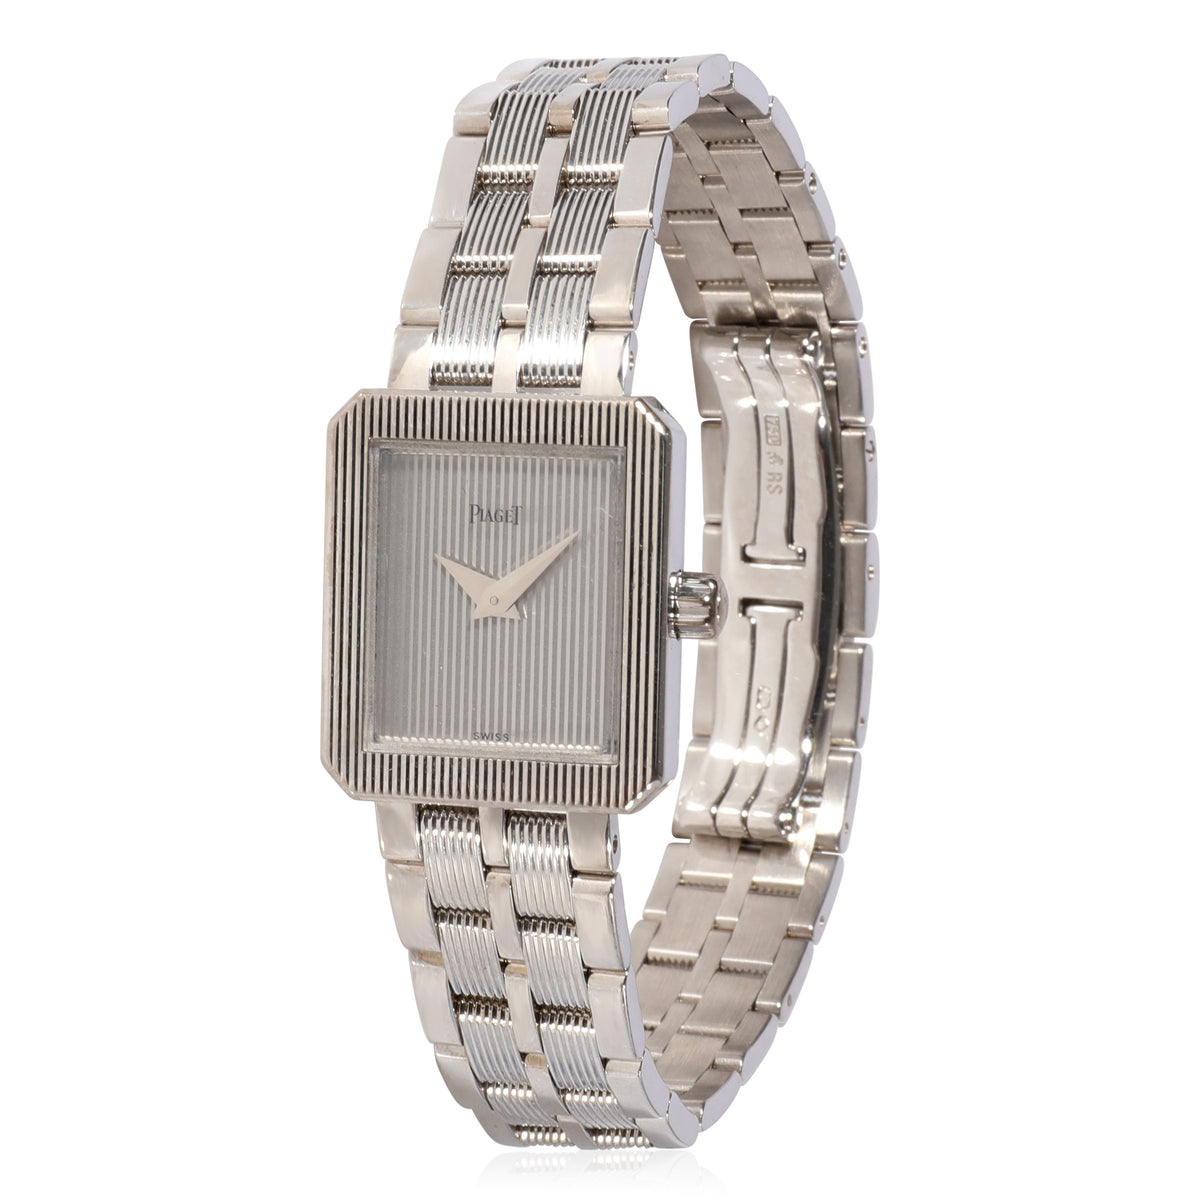 Piaget Protocole 5354 M601D Women's Watch in  White Gold